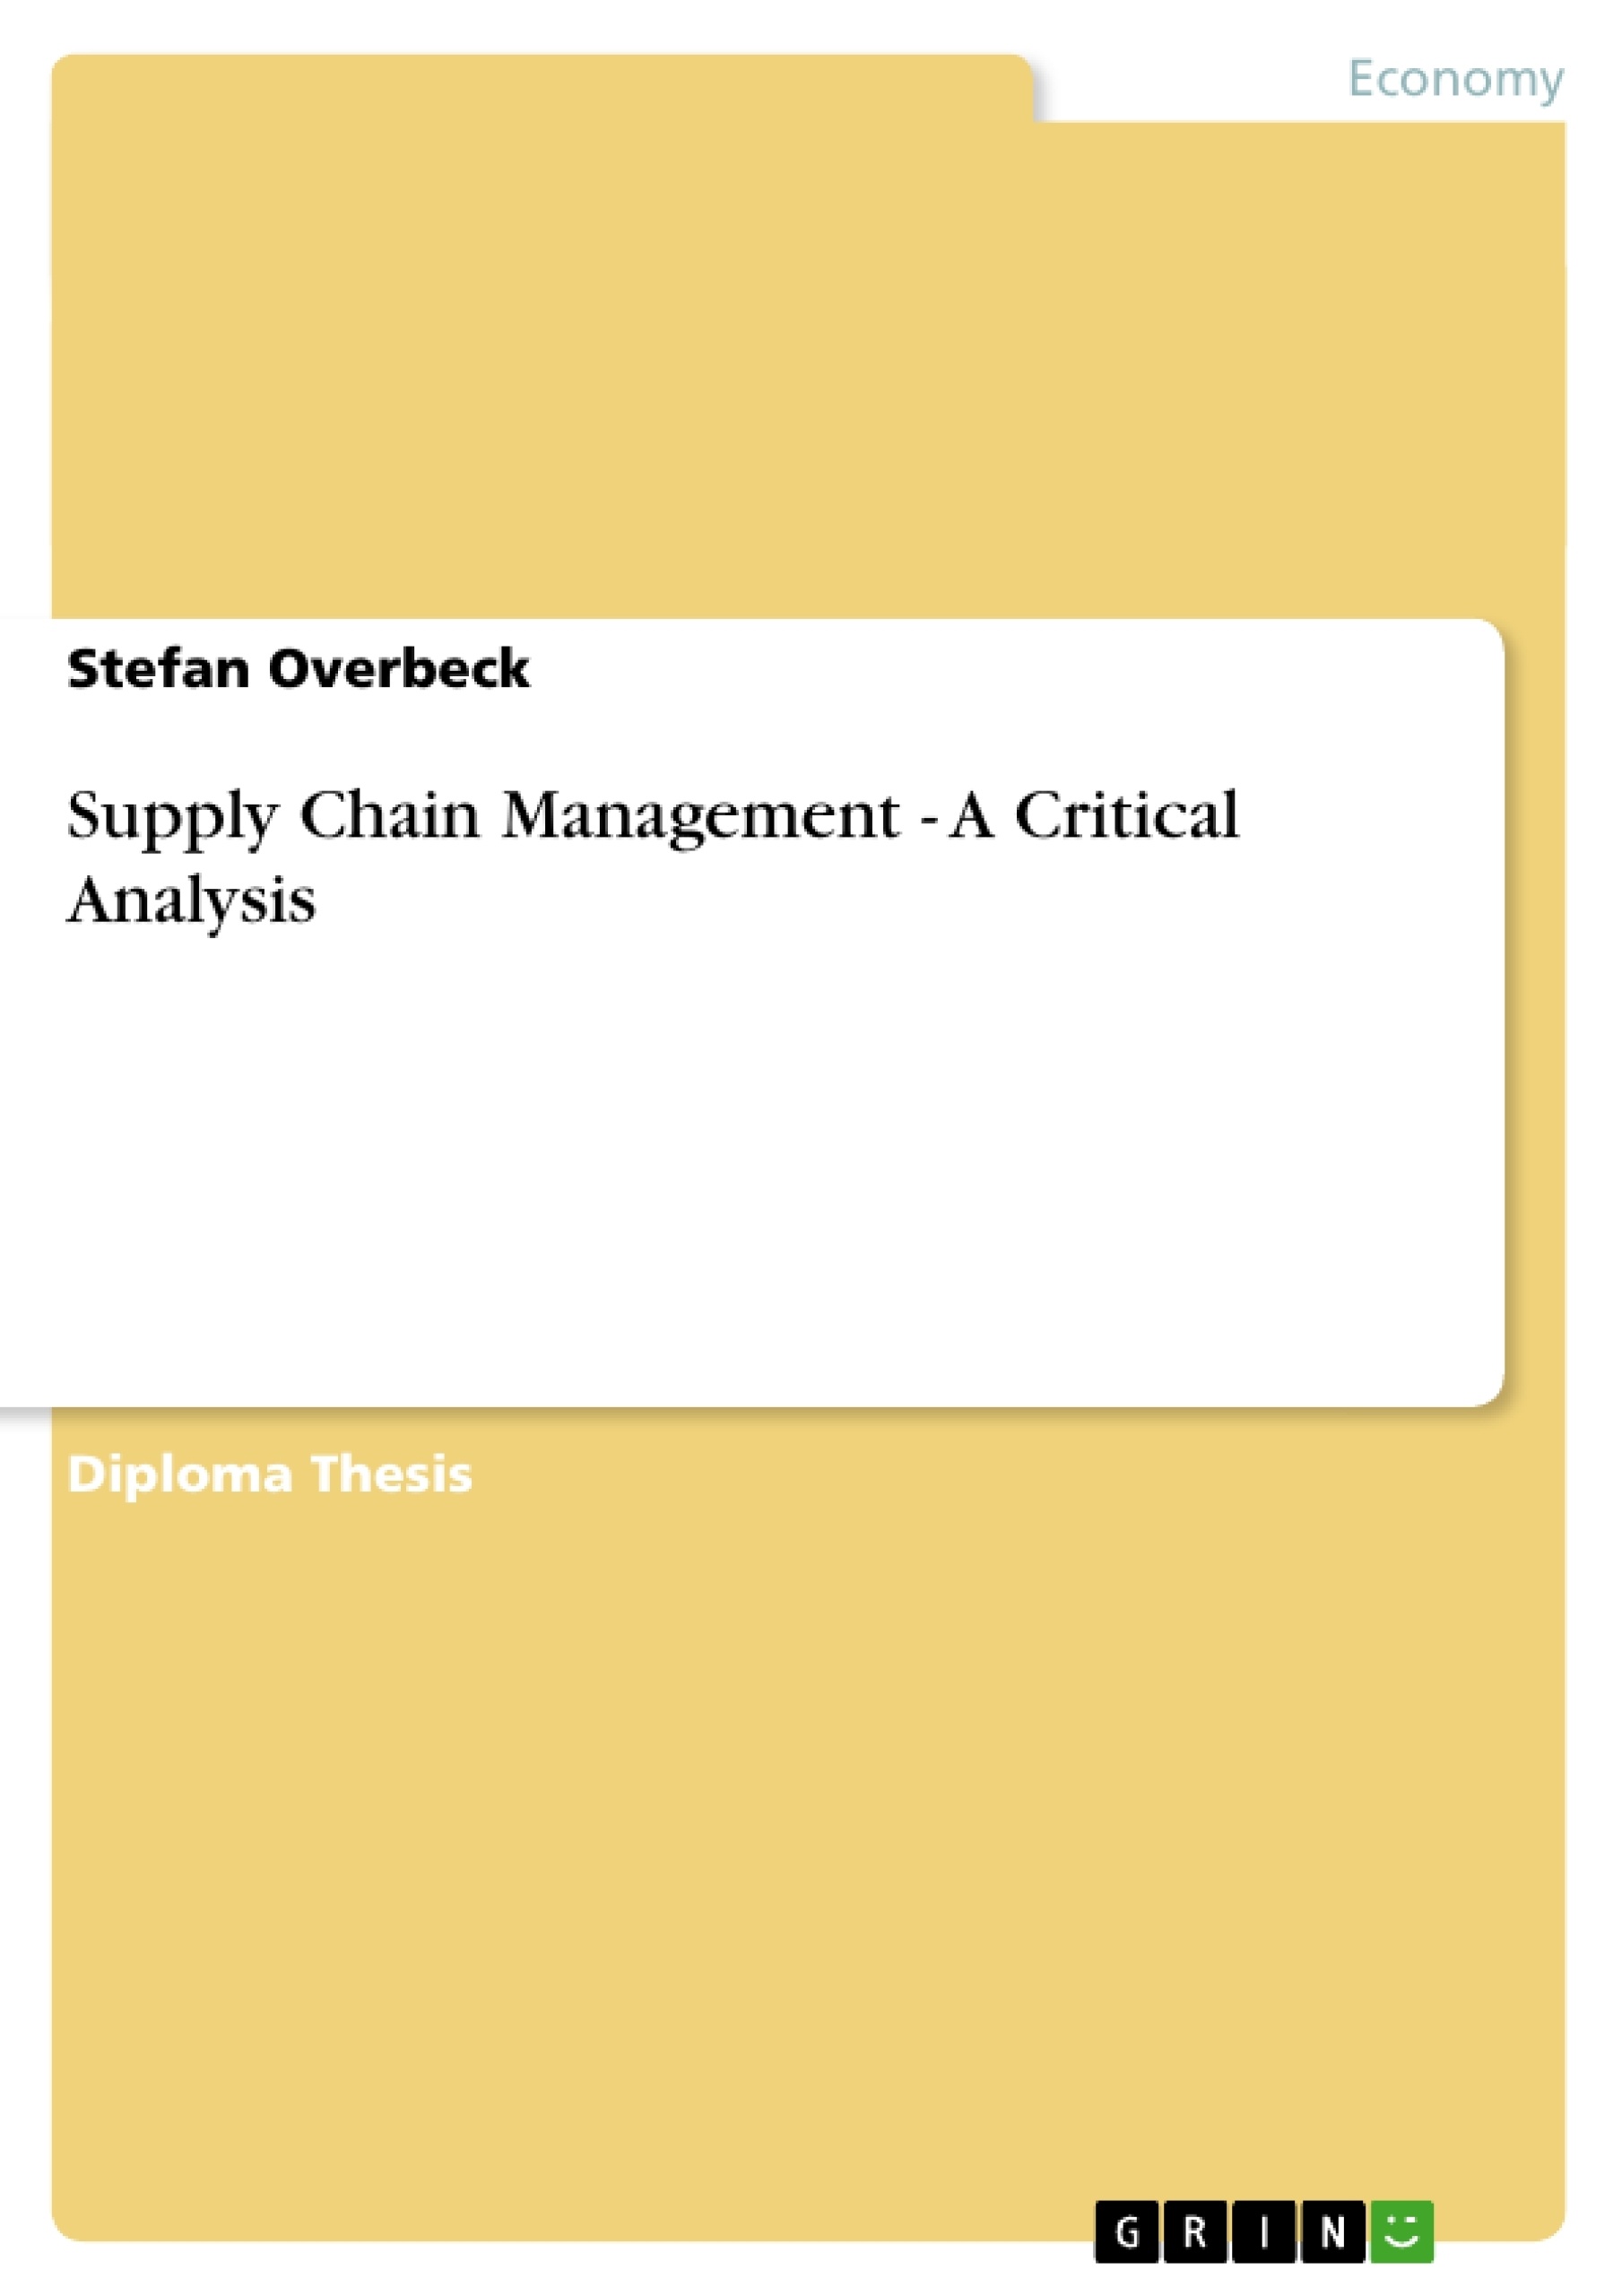 Title: Supply Chain Management - A Critical Analysis